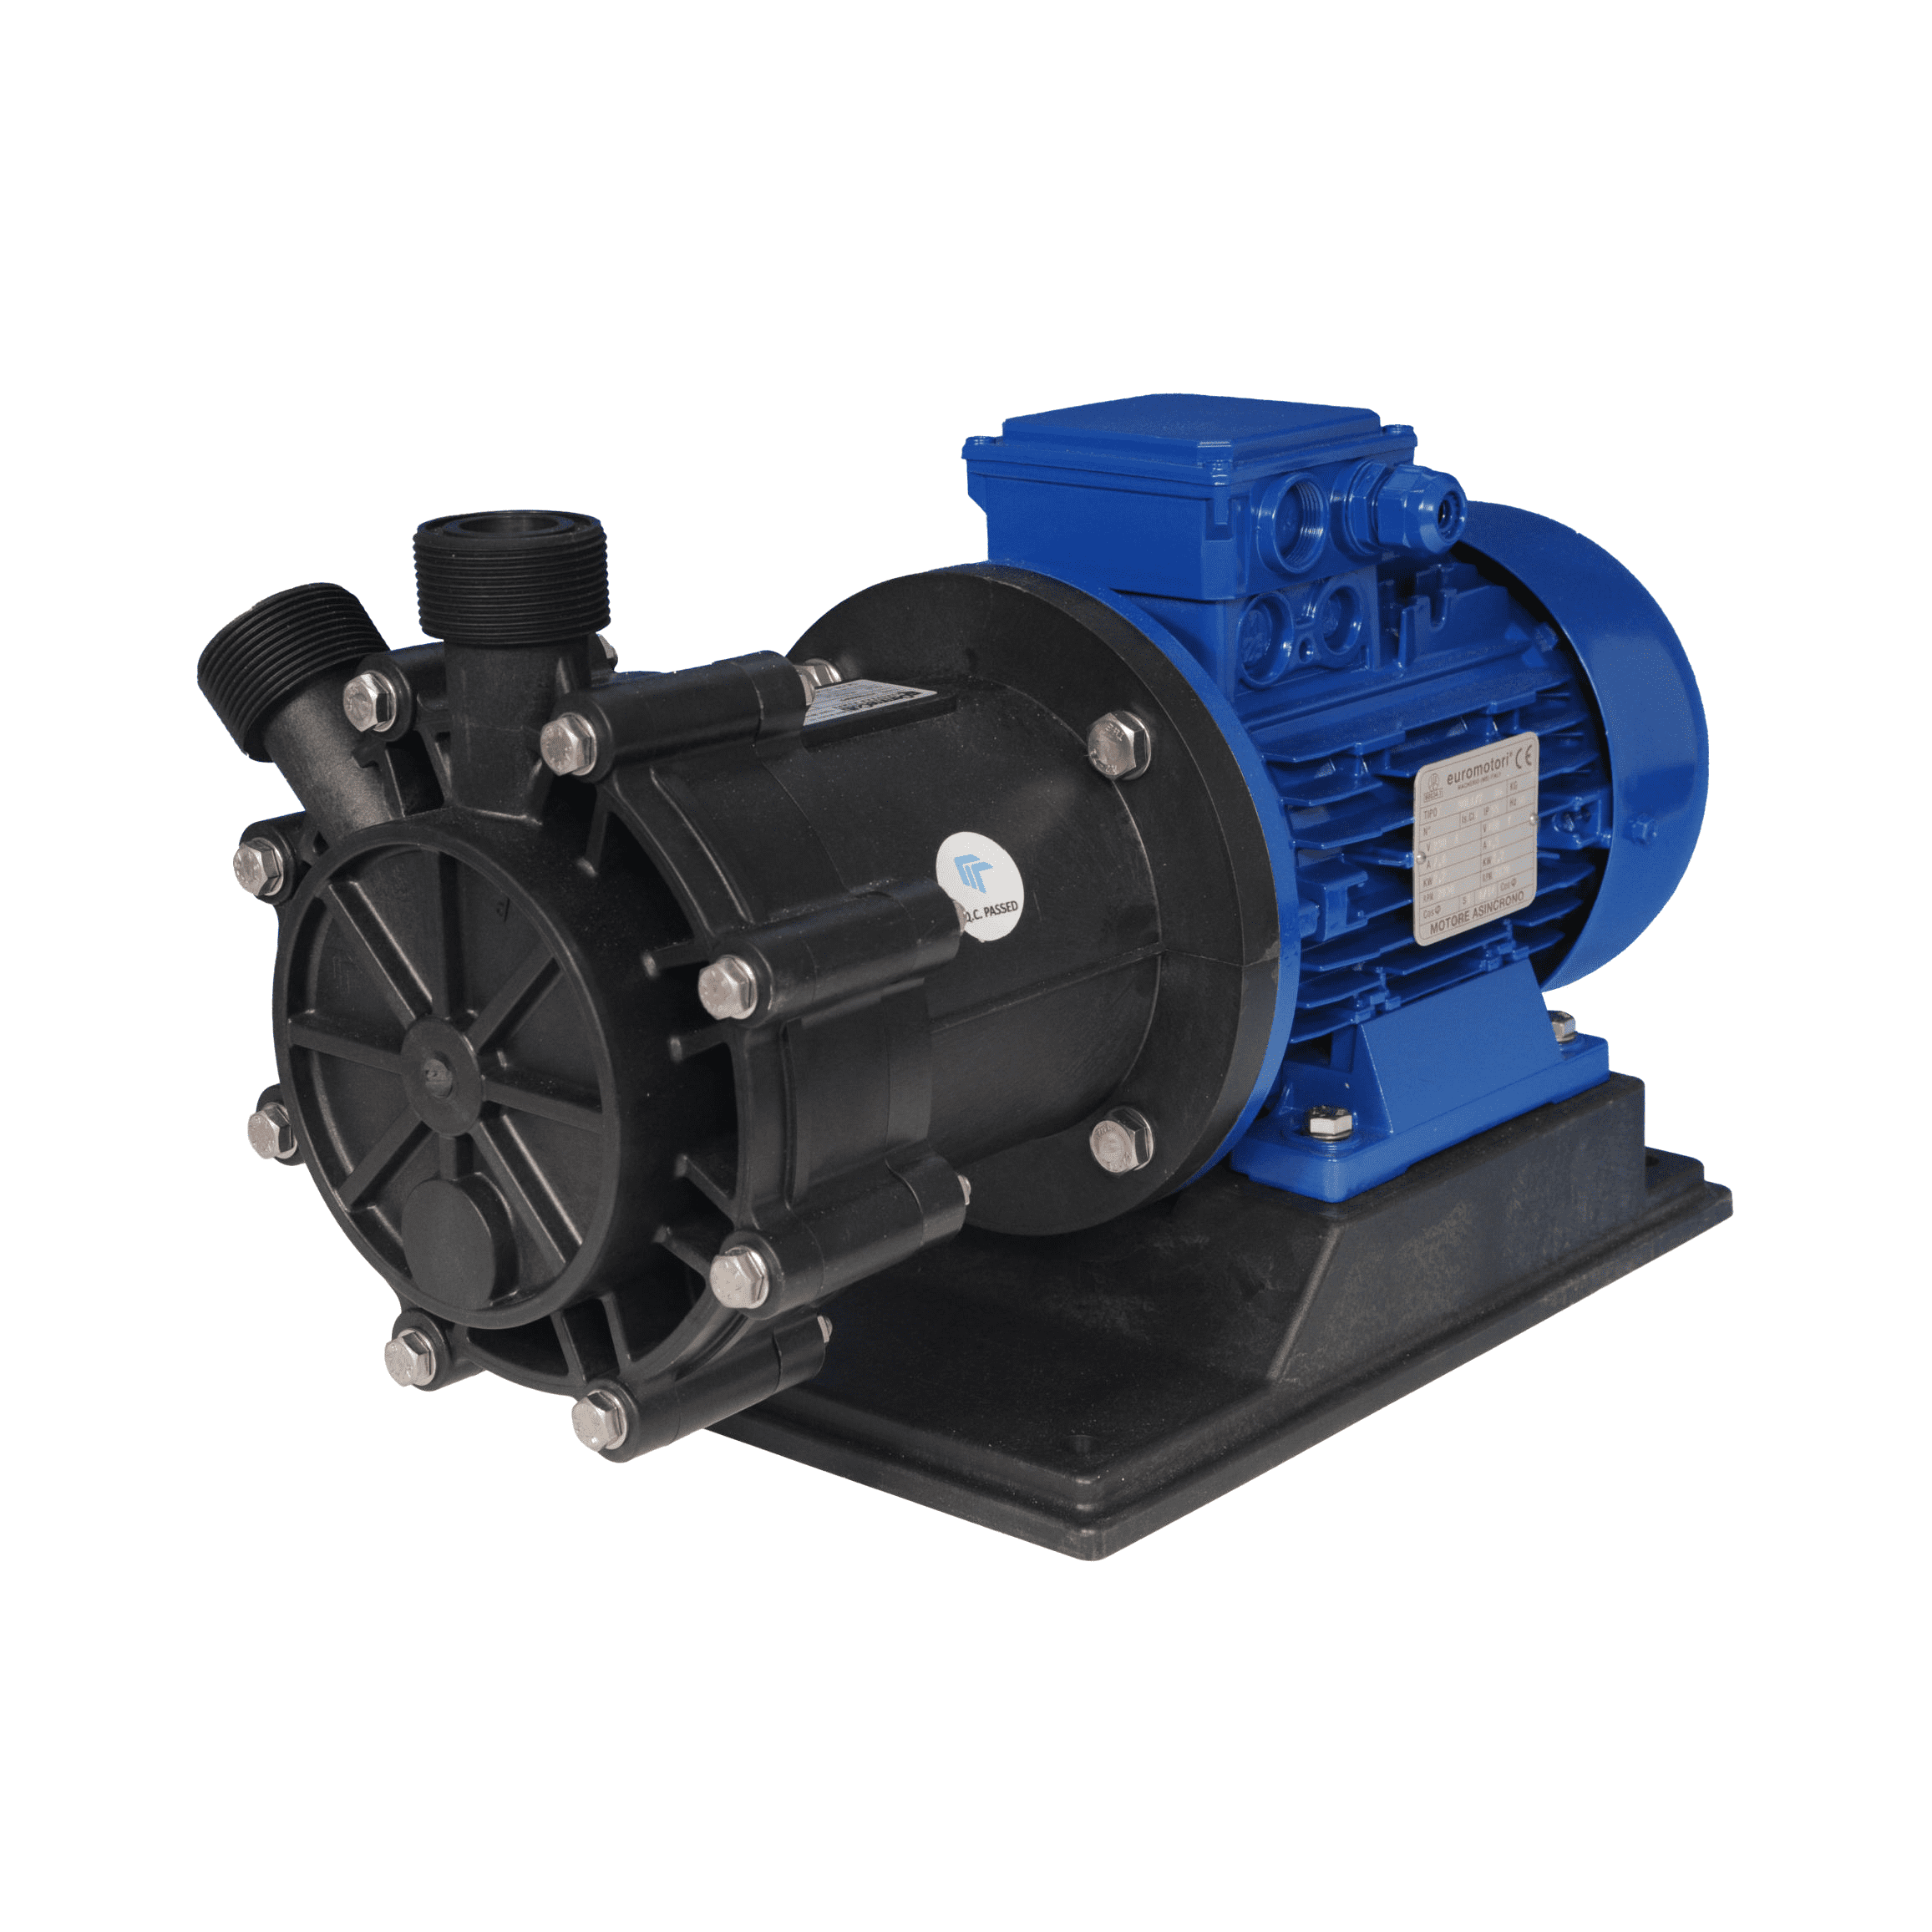 HTT – Magnetic drive turbine pumps in thermoplastic materials